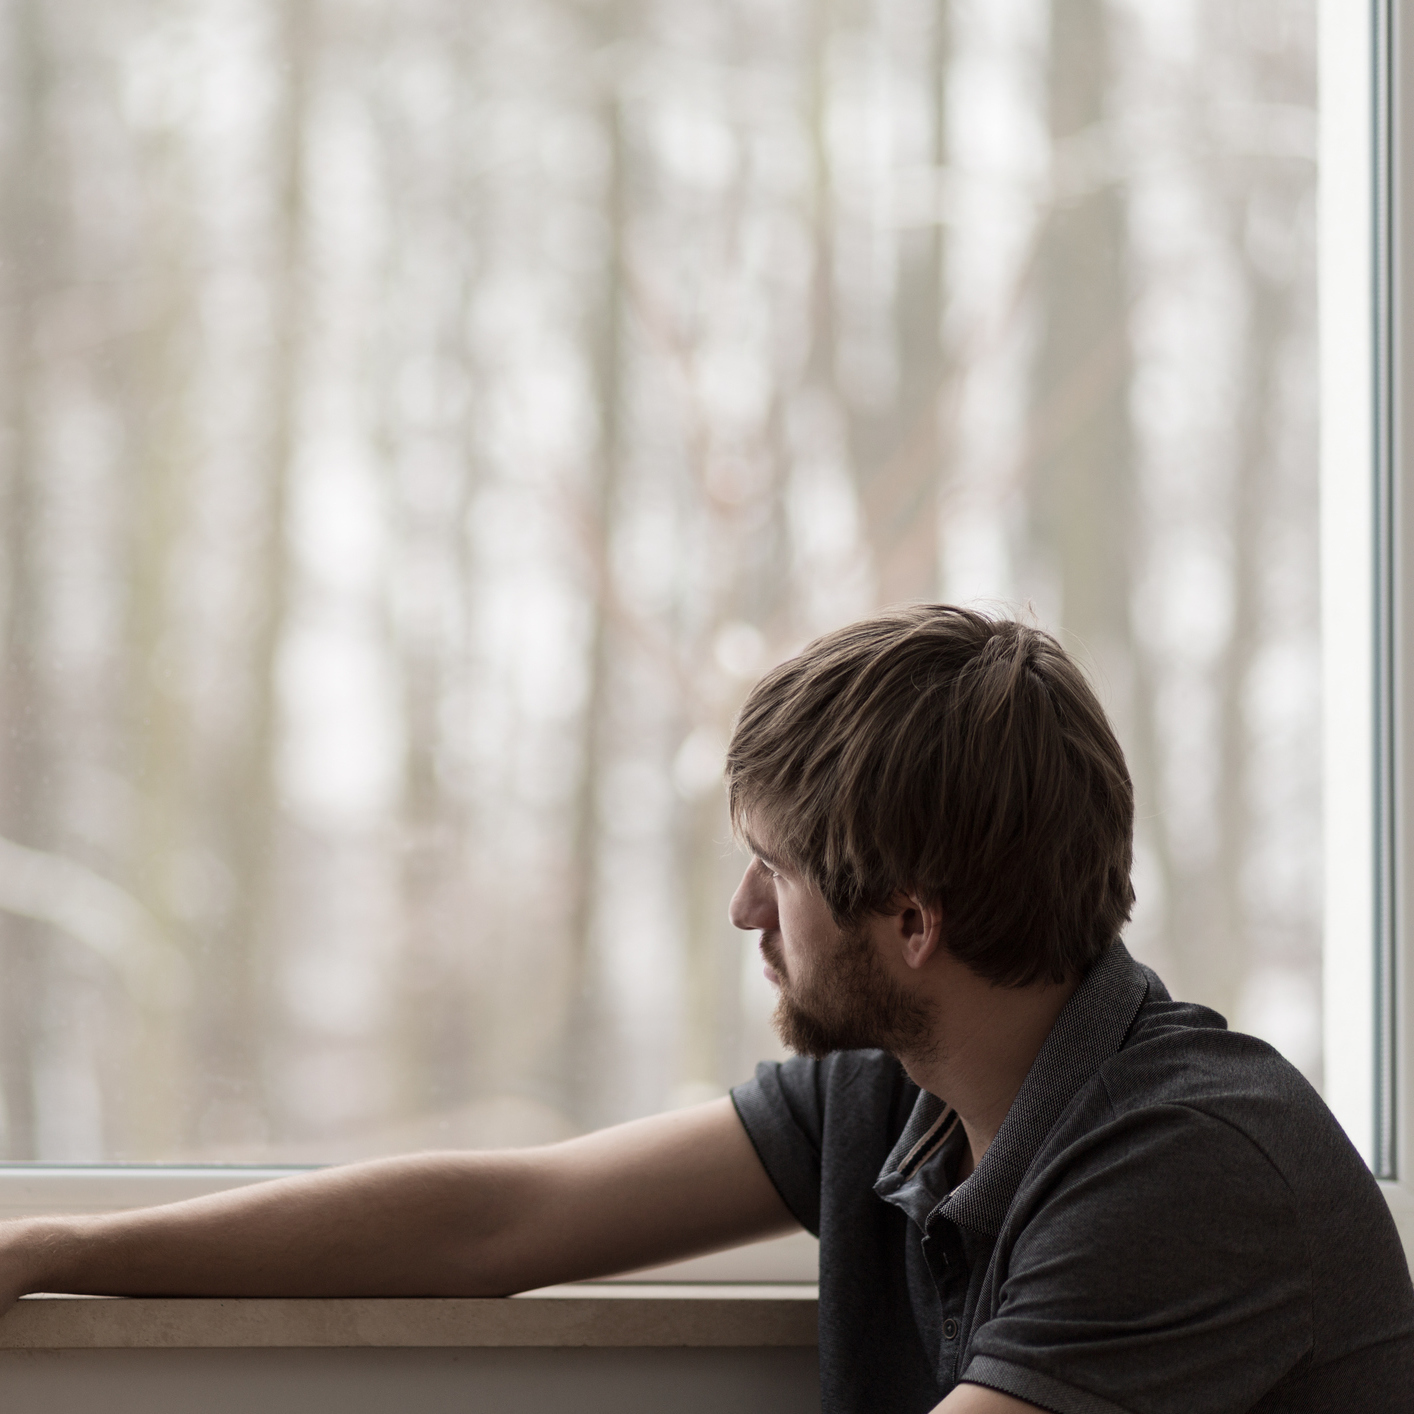 Young man who looks sad looking out the window at trees